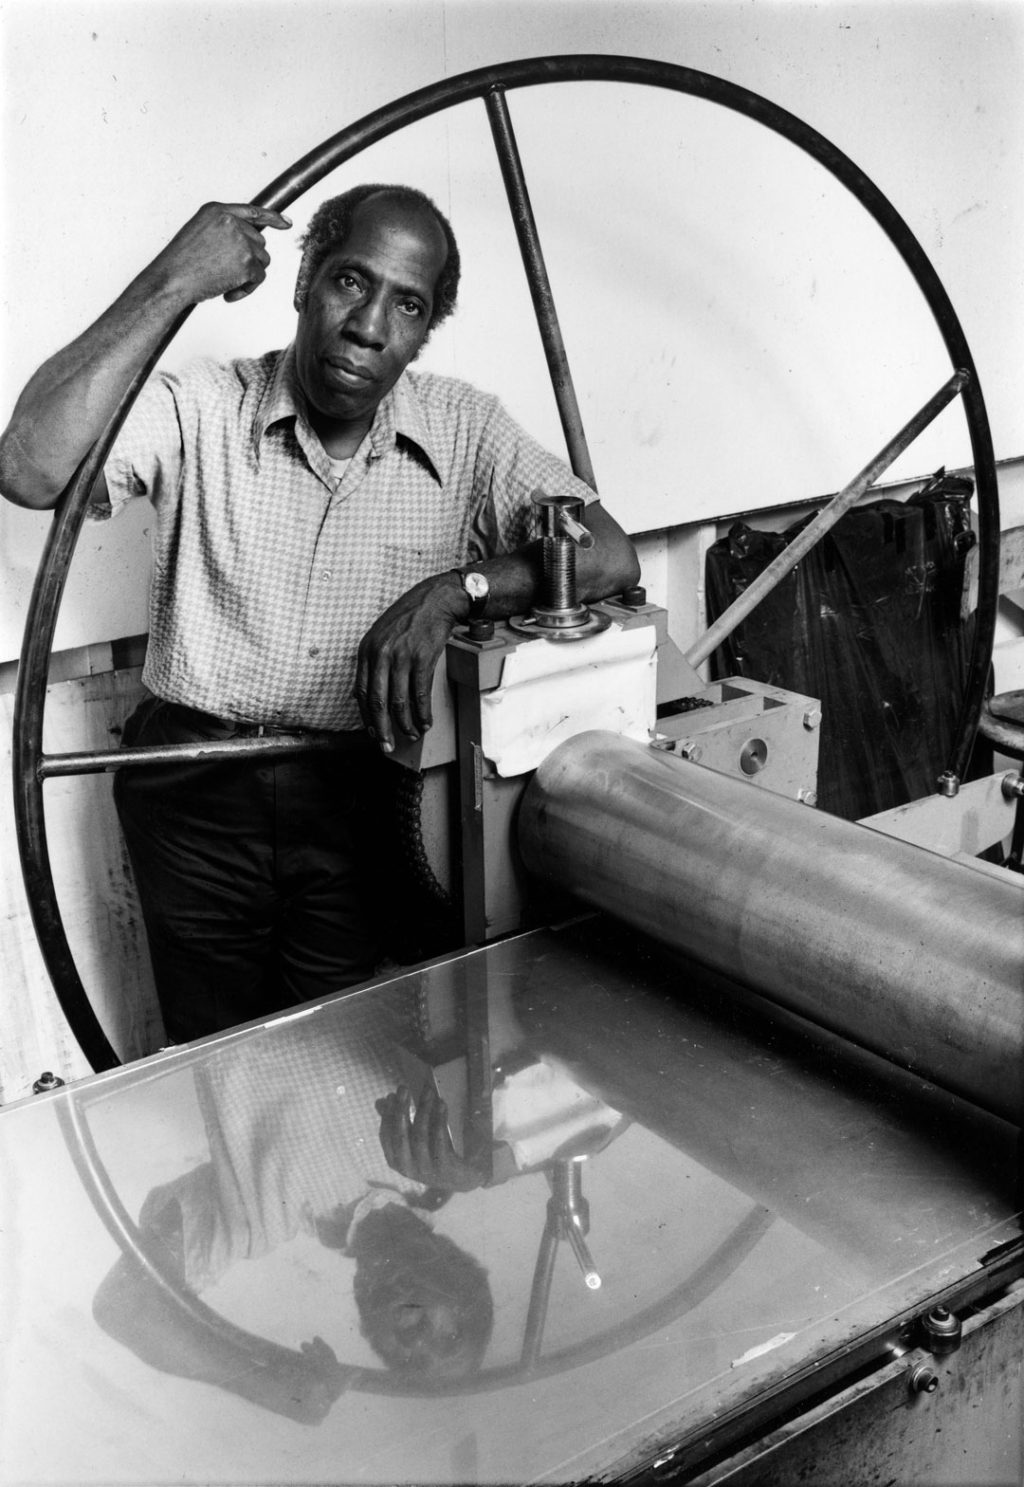 A photo of artist and printmaker Robert Blackburn taken by Peter Sumner Walton Bellamy. In the portrait, Blackburn is posing with printmaking equipment and looking straight at the camera with a calm expression. He is wearing a short-sleeve button-down shirt, dark pants, and a watch. His reflection is visible in the printing surface.